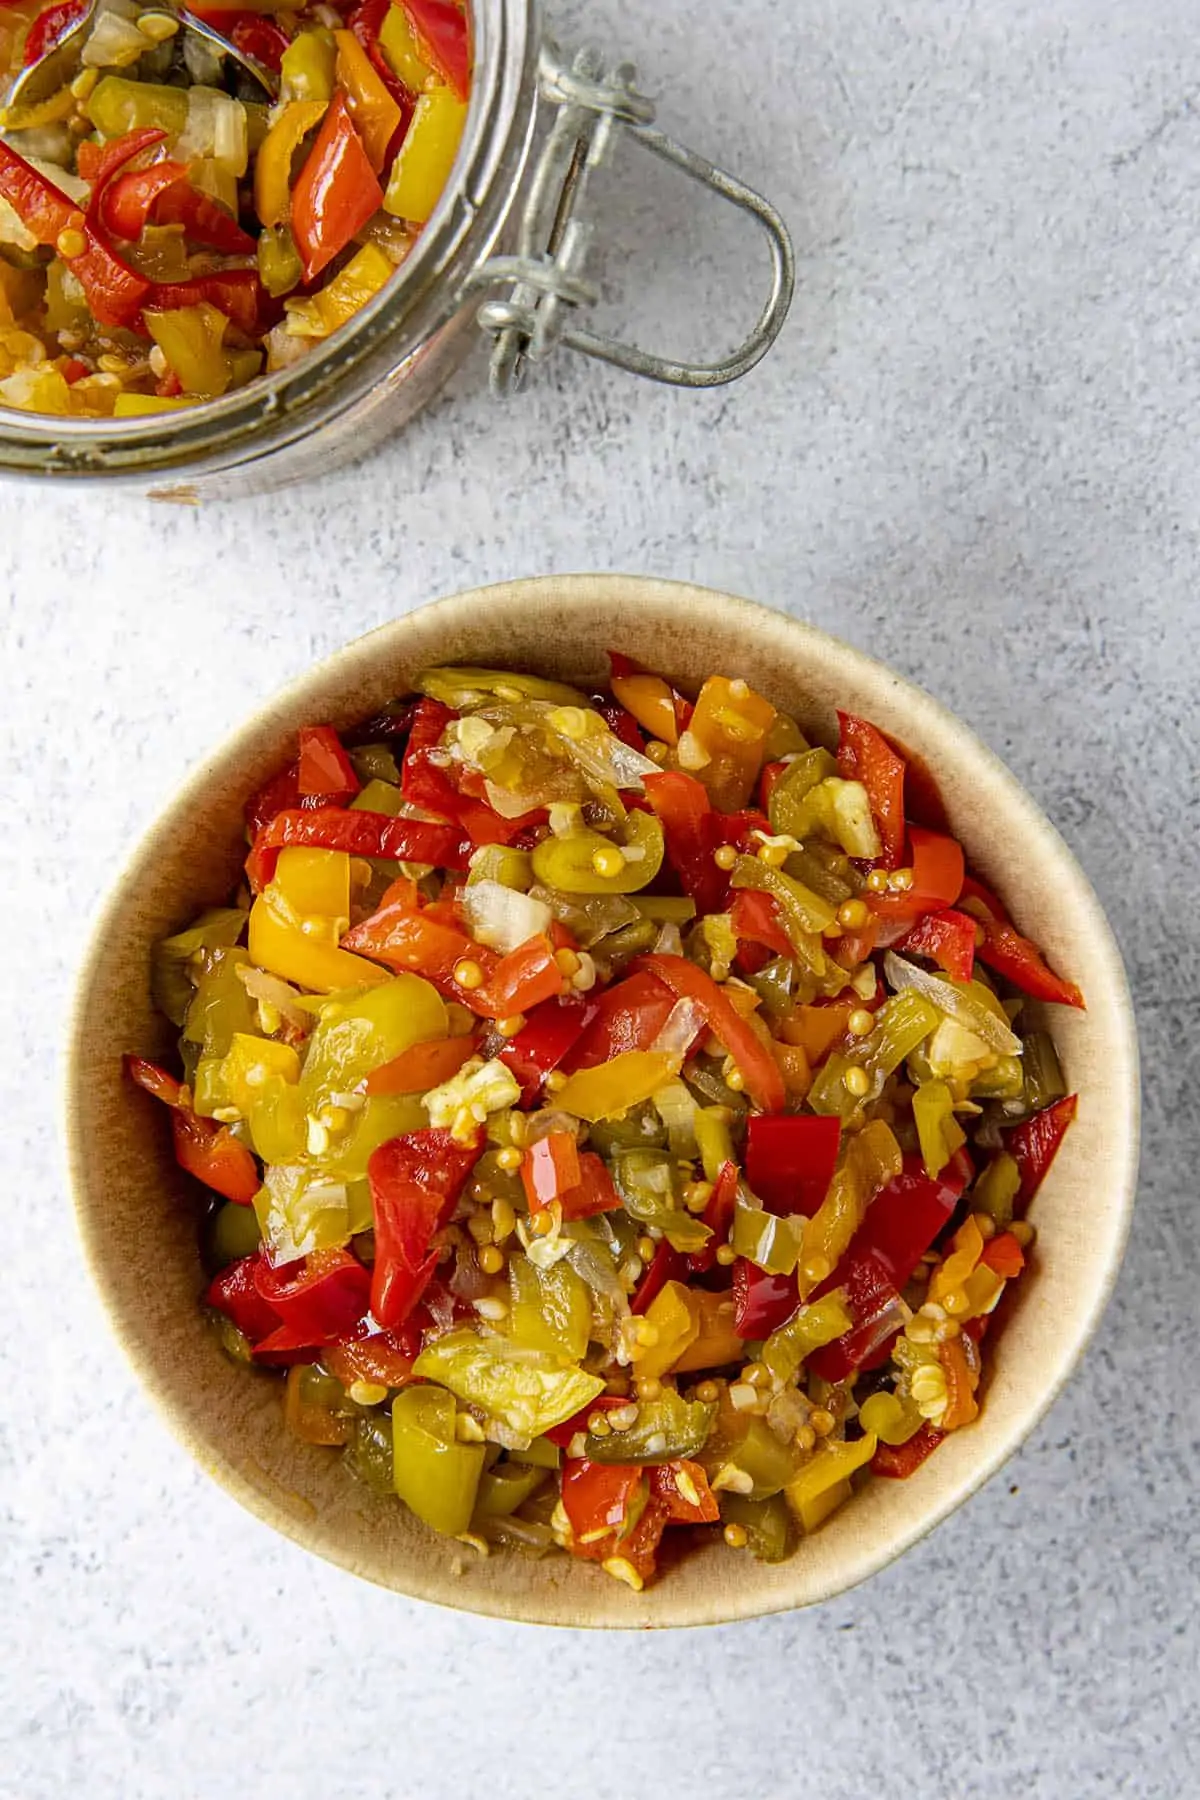 Hot Pepper Relish in a bowl, ready to serve